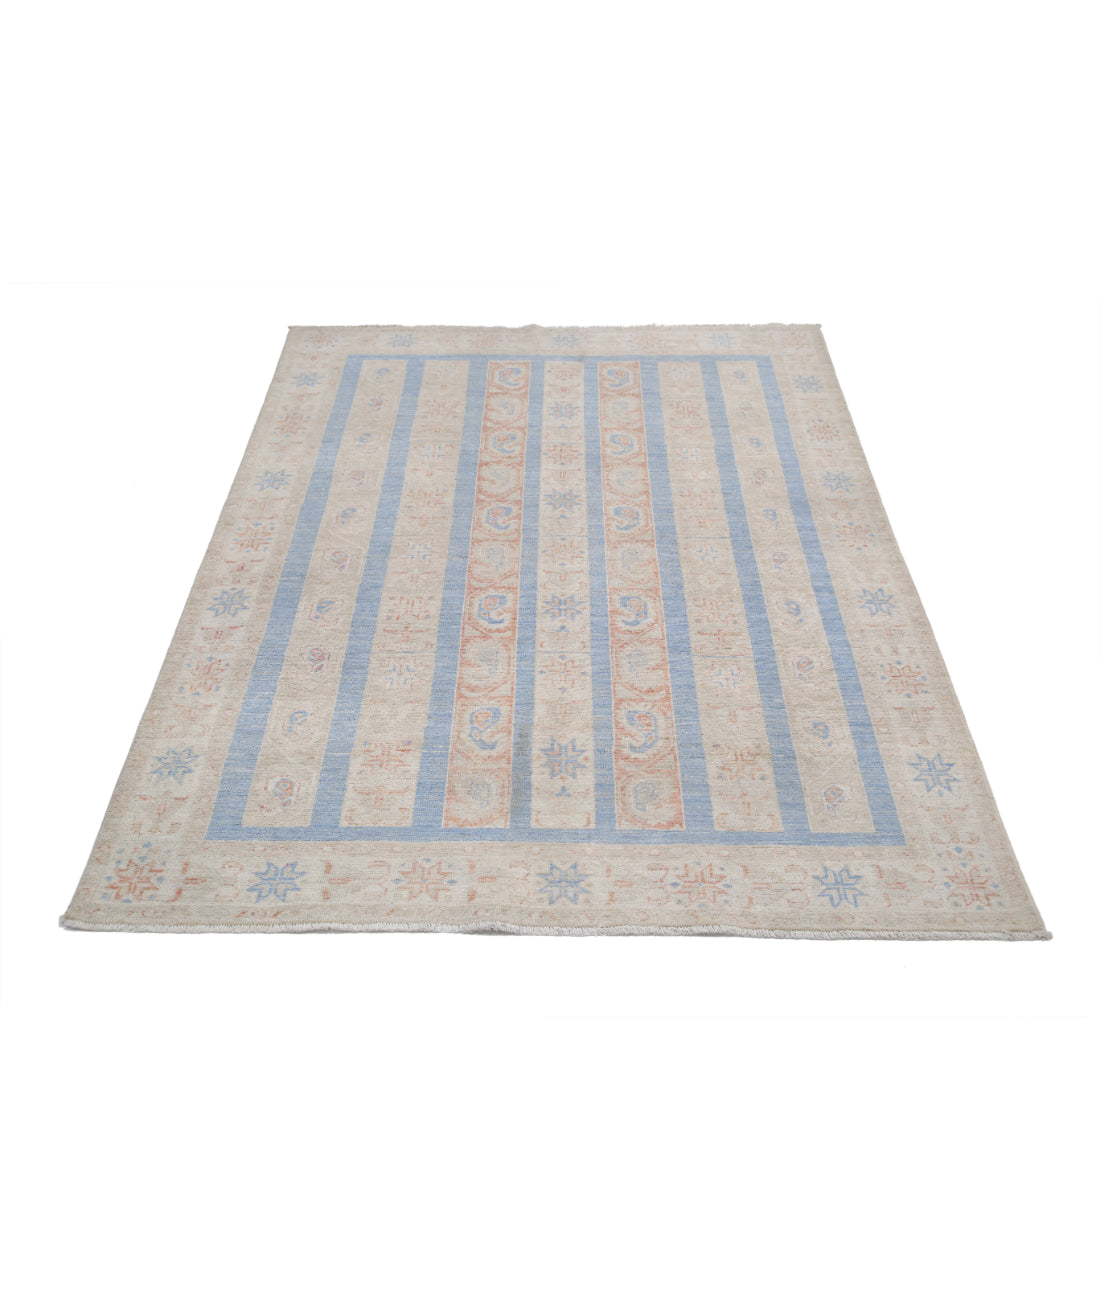 Hand Knotted Shaal Wool Rug - 4'9'' x 6'0'' 4'9'' x 6'0'' (143 X 180) / Multi / Multi